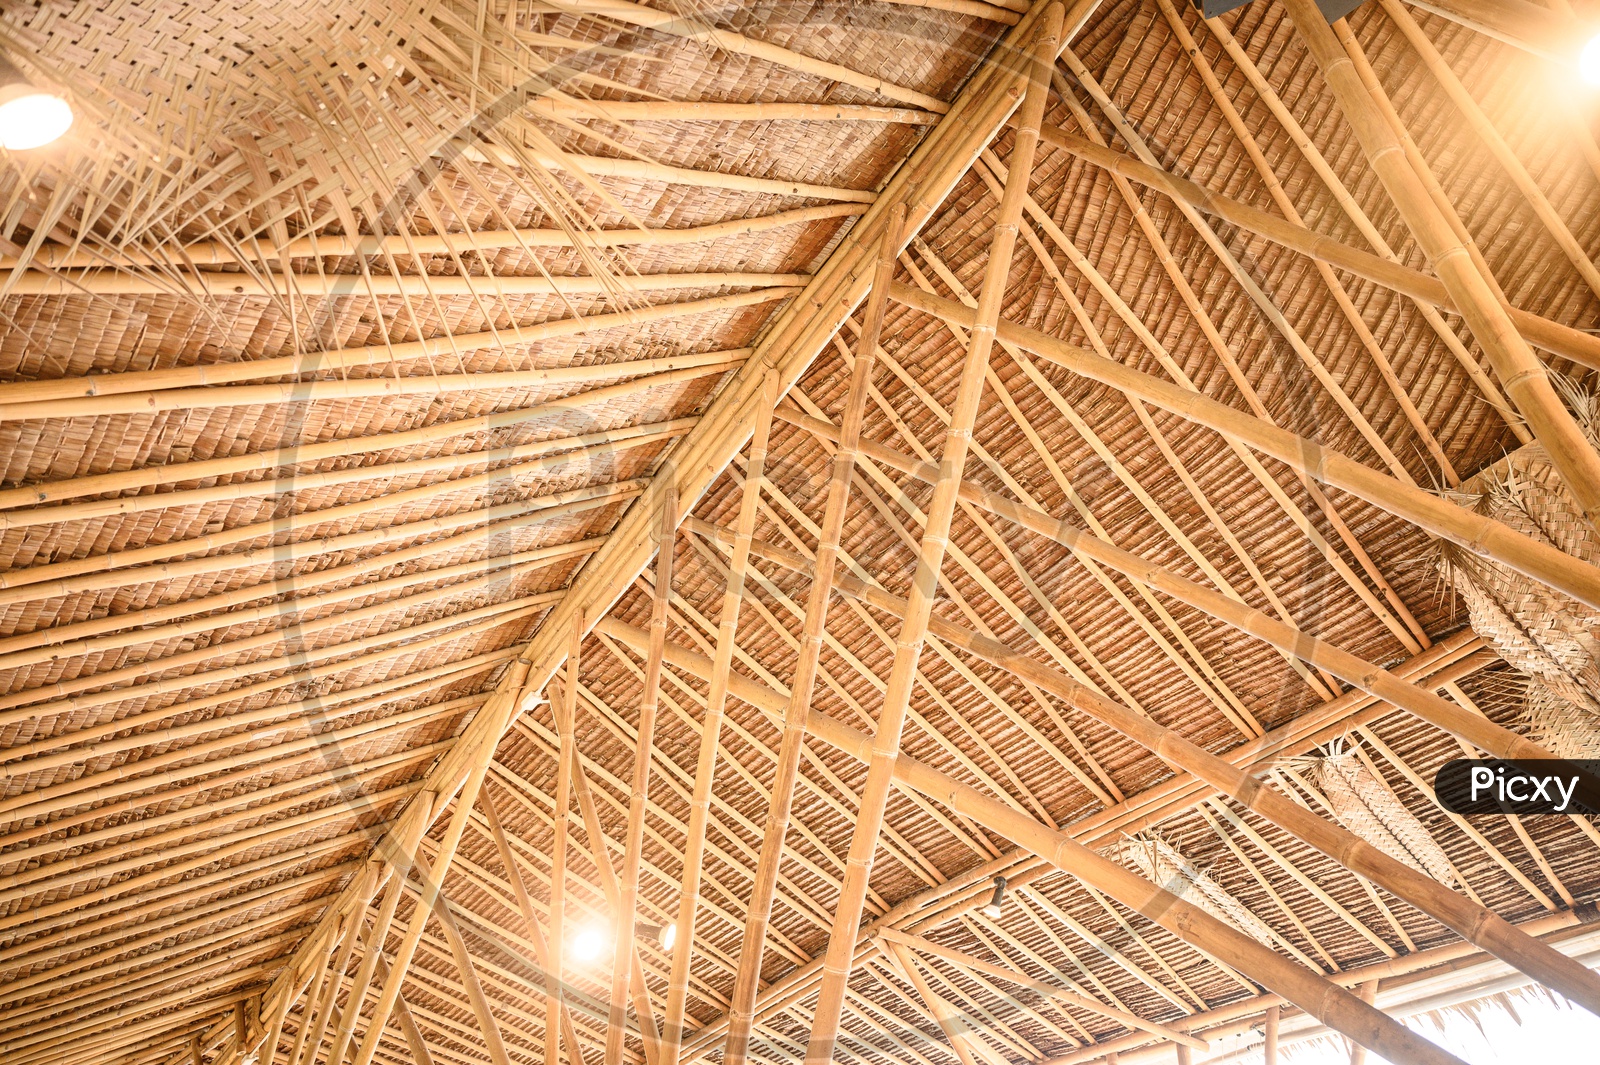 A bamboo roof in Thai Cafe